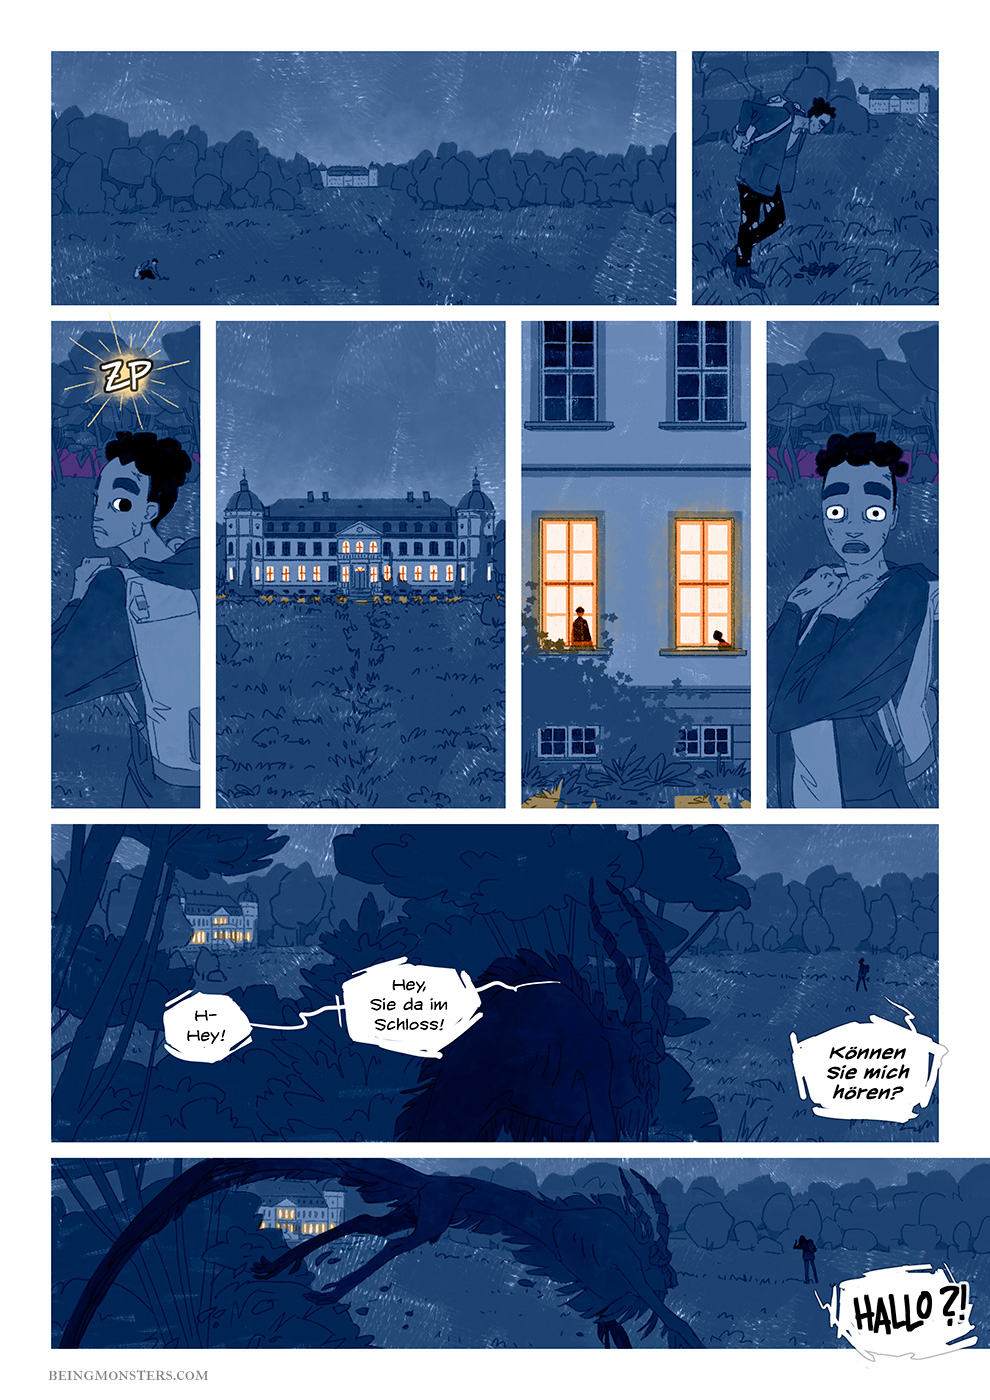 Being Monsters Book 1 Chapter 3 page 25 EN